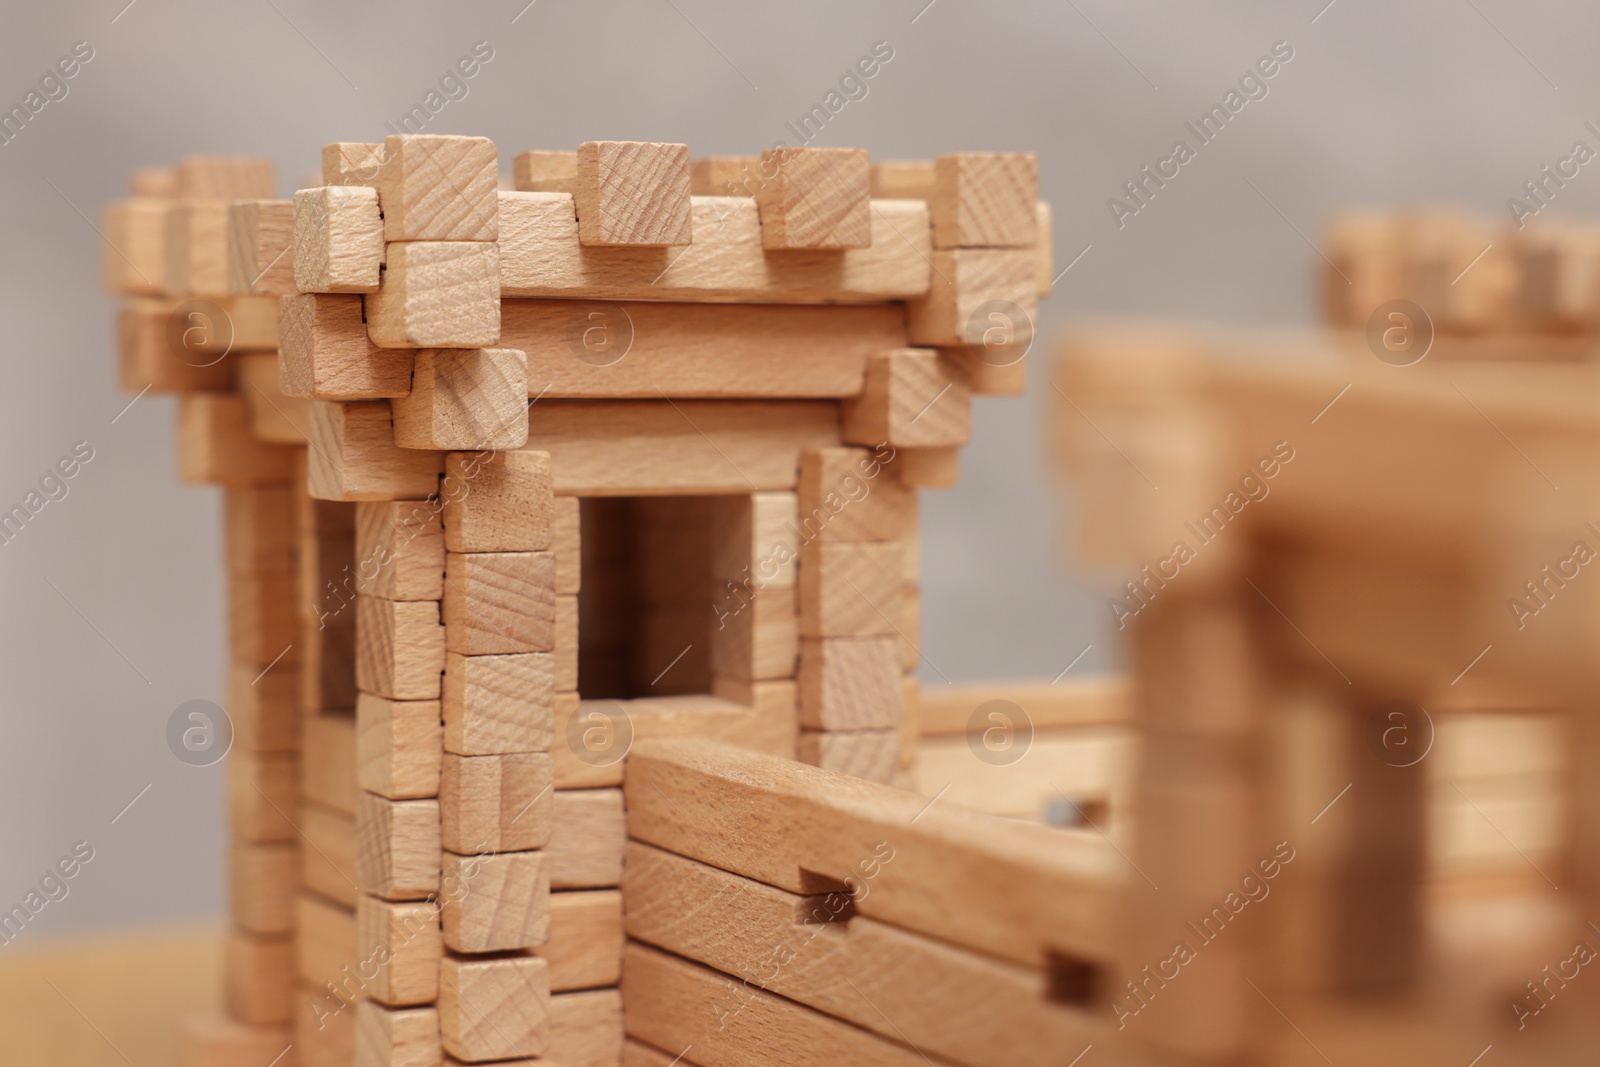 Photo of Wooden fortress against grey background, closeup. Children's toy